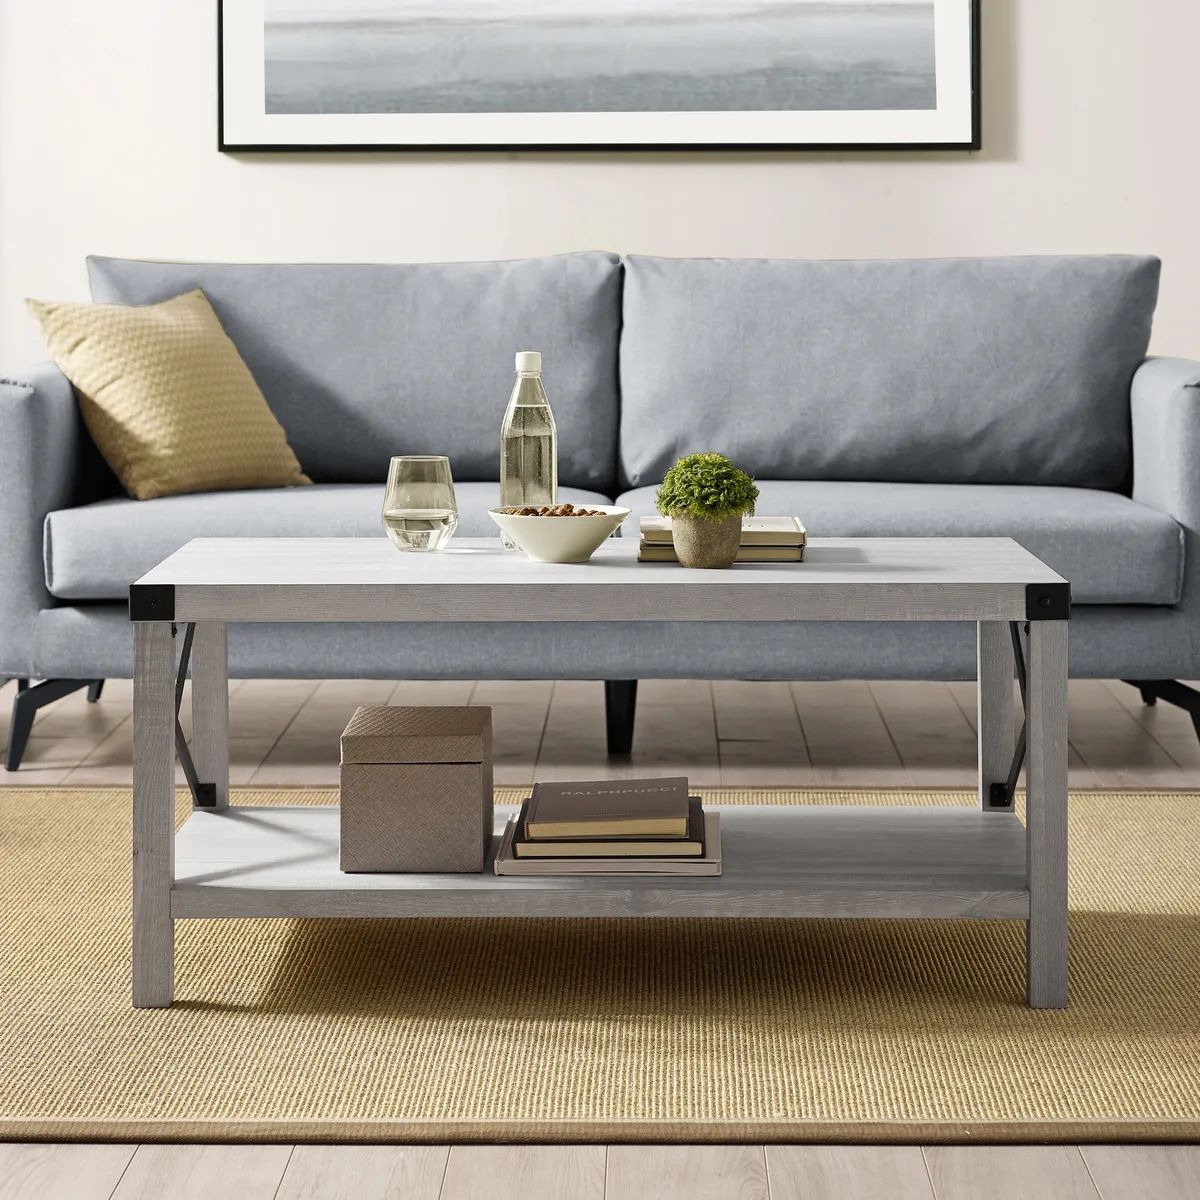 Woven Paths Magnolia Metal X Coffee Table Stone Grey Featuring Metal Accent  Usa | Ebay For Woven Paths Coffee Tables (View 13 of 15)